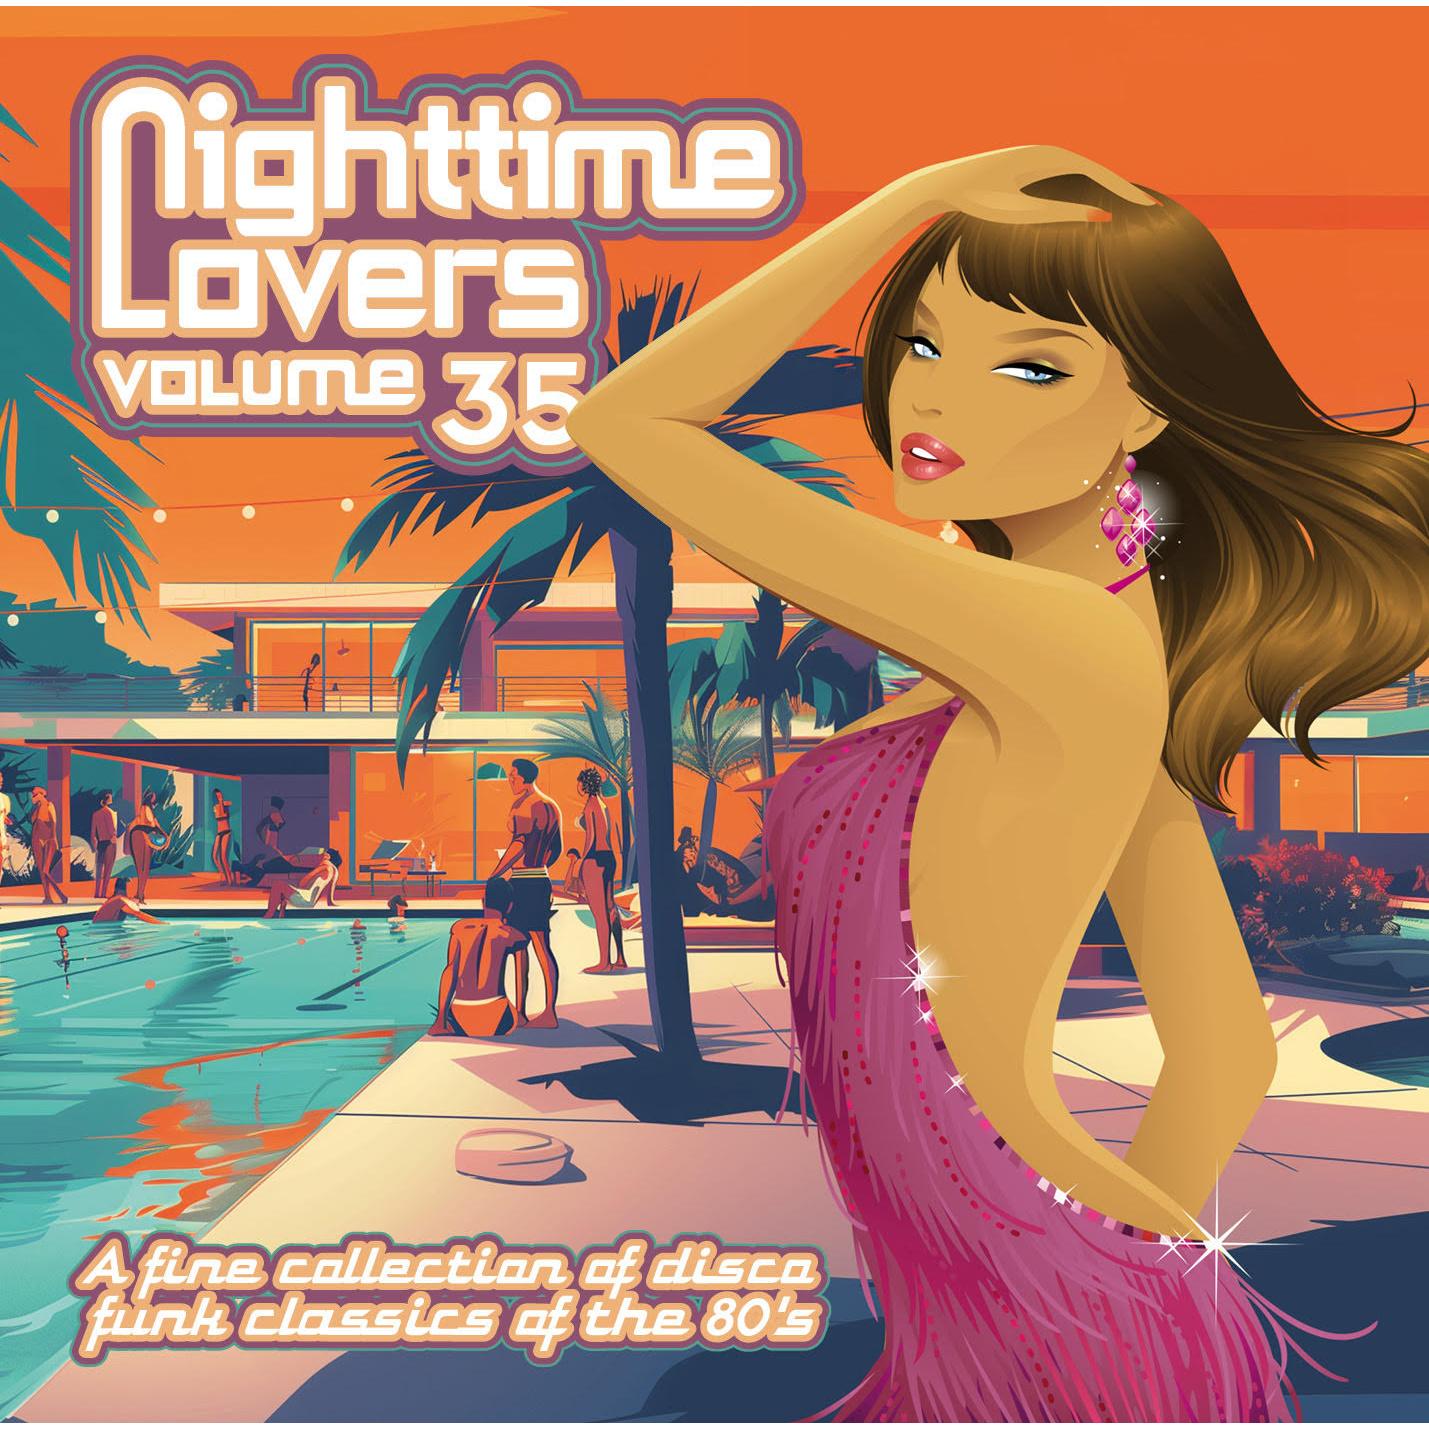 NIGHTTIME LOVERS VOL. 35 - A FINE COLLECTION OF DISCO FUNK CLASSICS OF THE 80'S